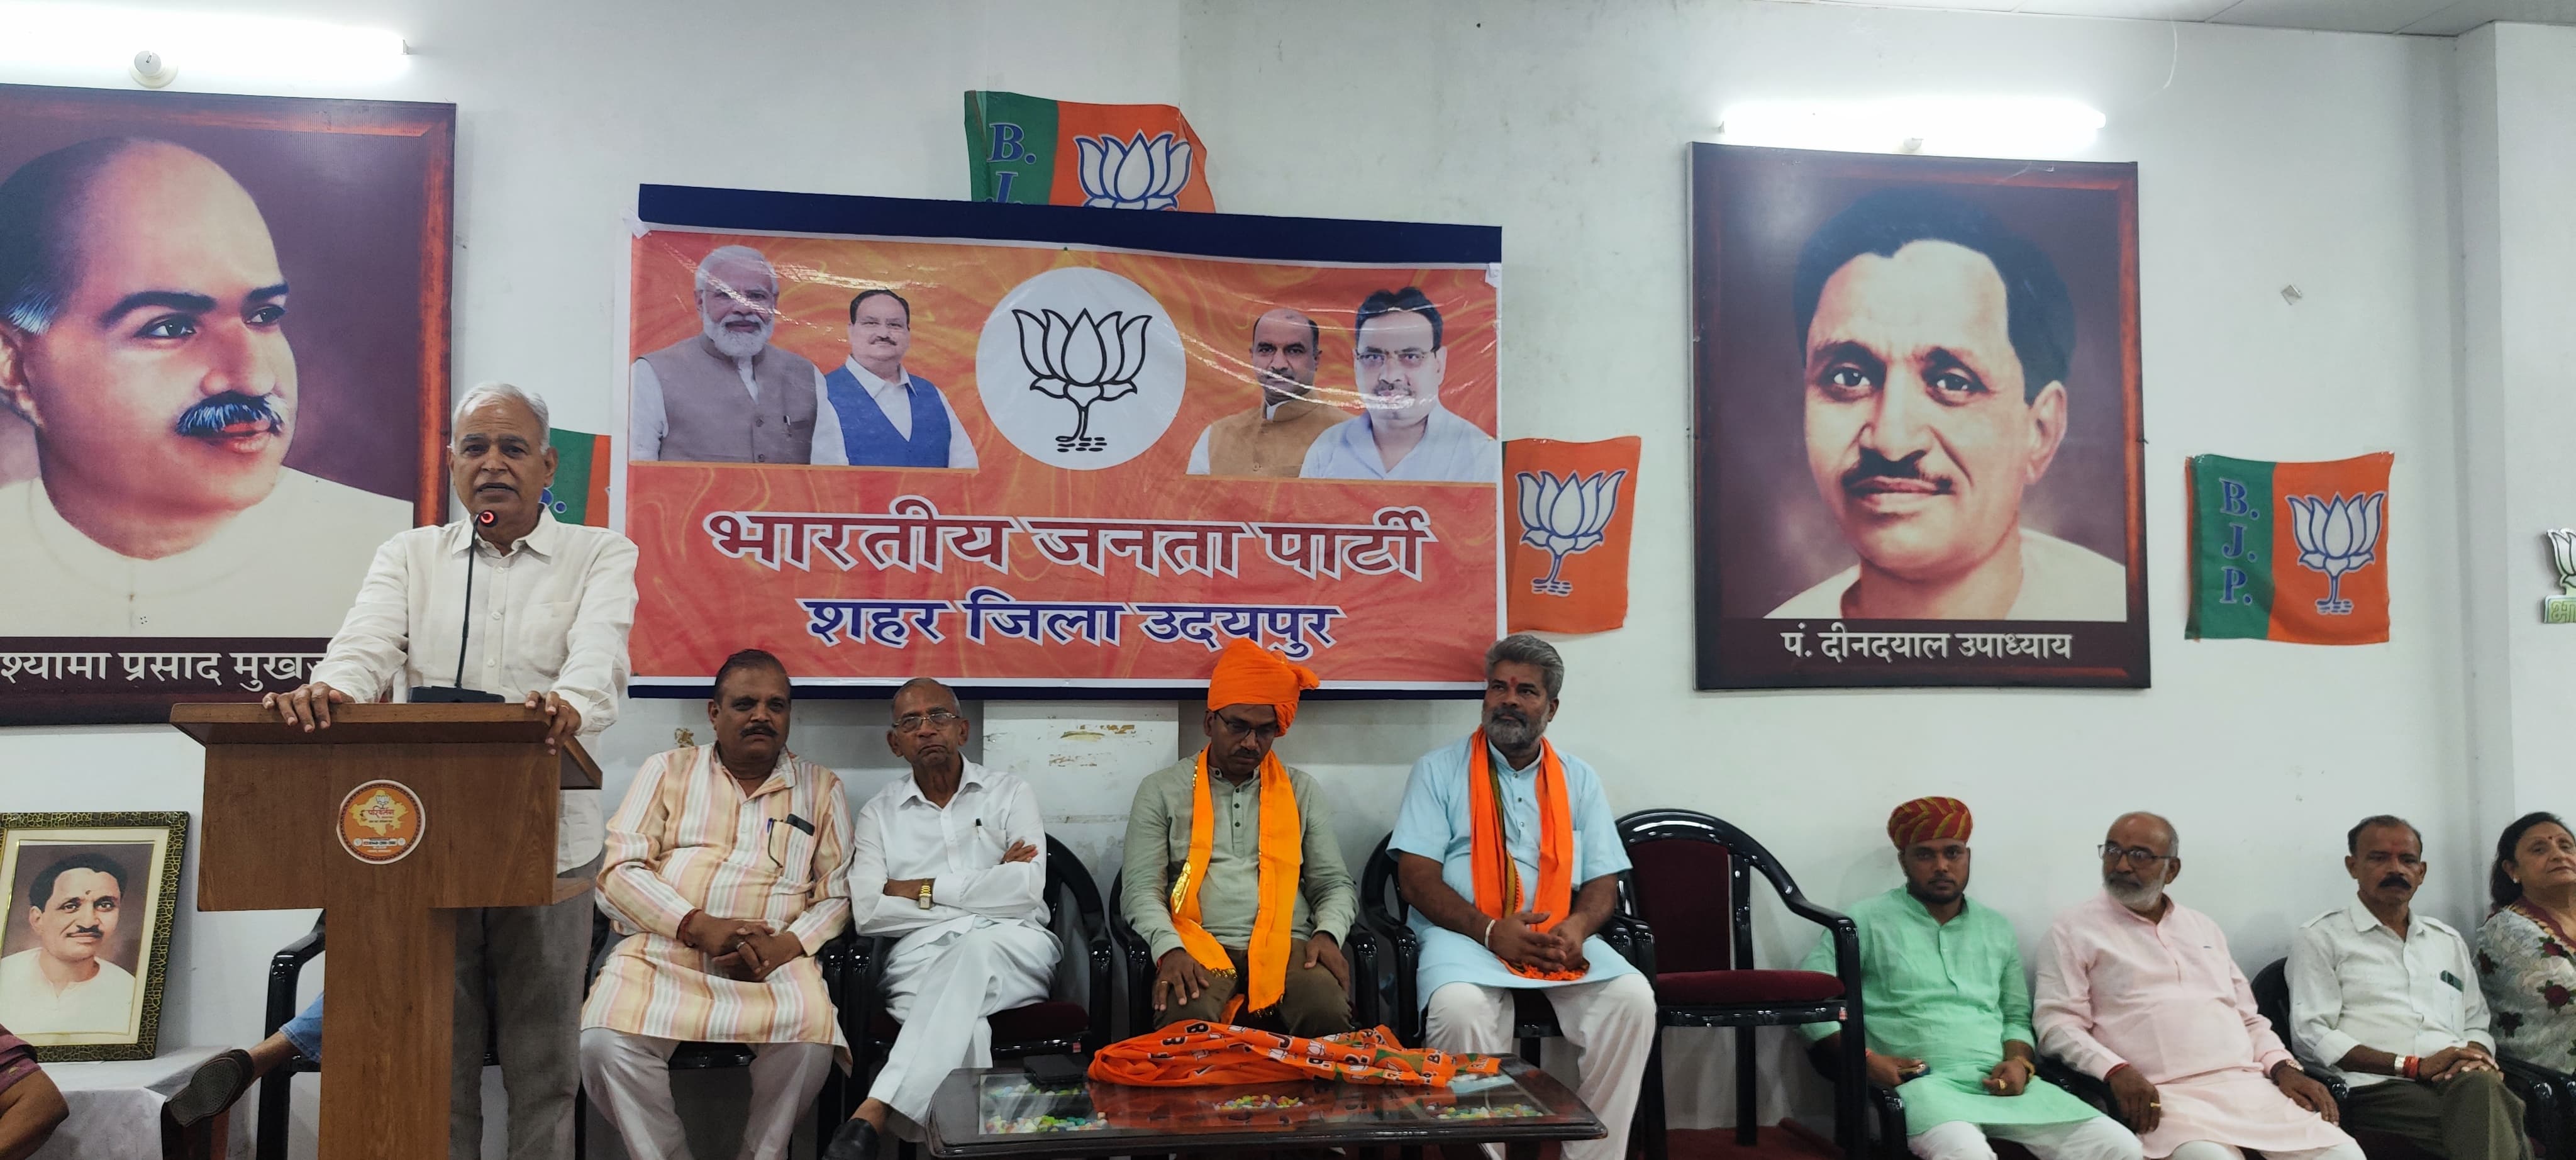 #### BJP Workers Welcome Newly Elected MP Manna Lal Rawat